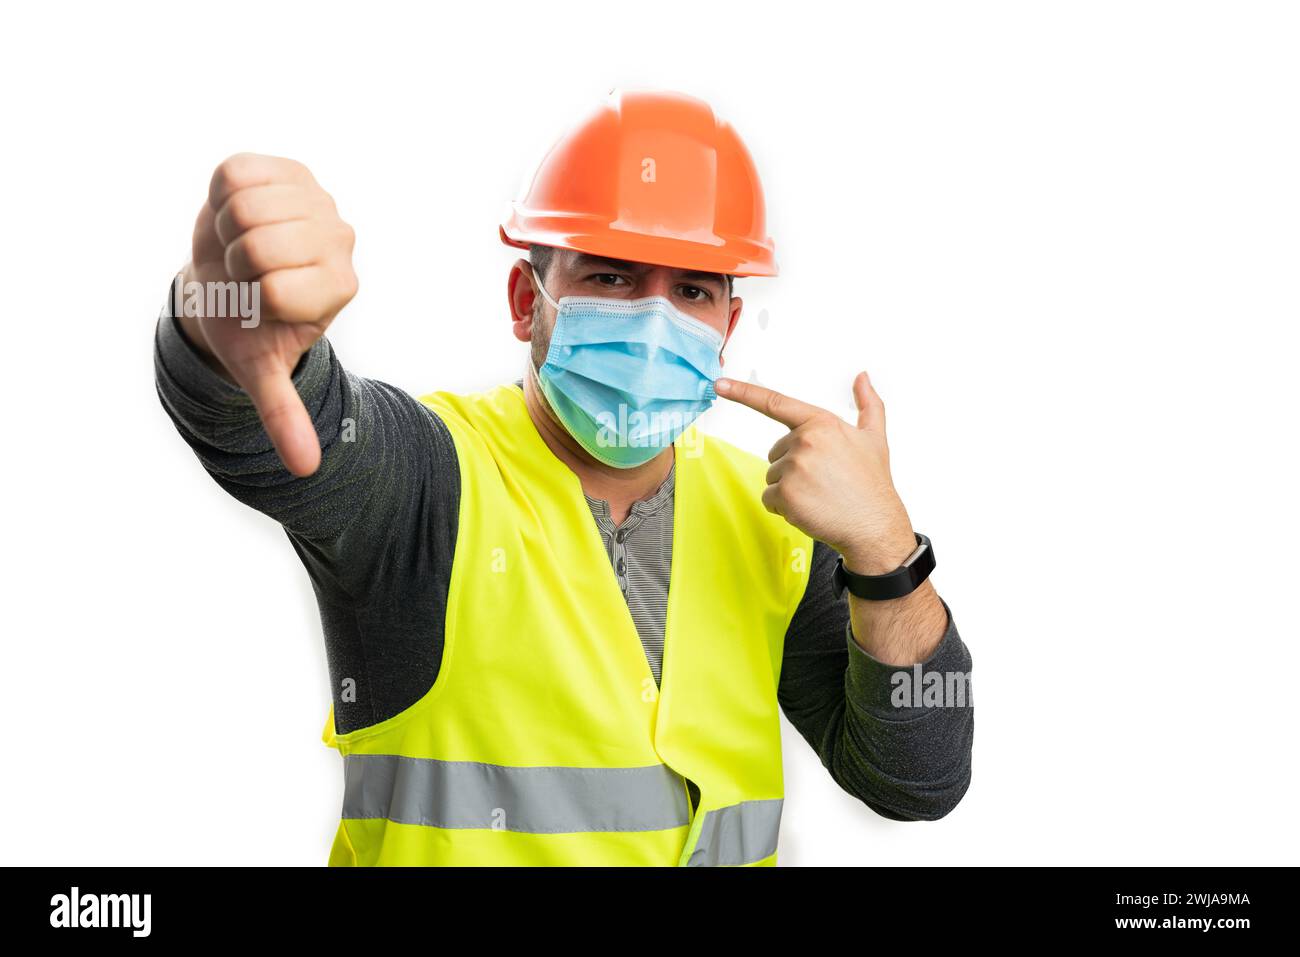 Constructor man wearing fluorescent vest and hardhat pointing index finger at medical or surgical mask making thumb-down dislike gesture as pandemic c Stock Photo